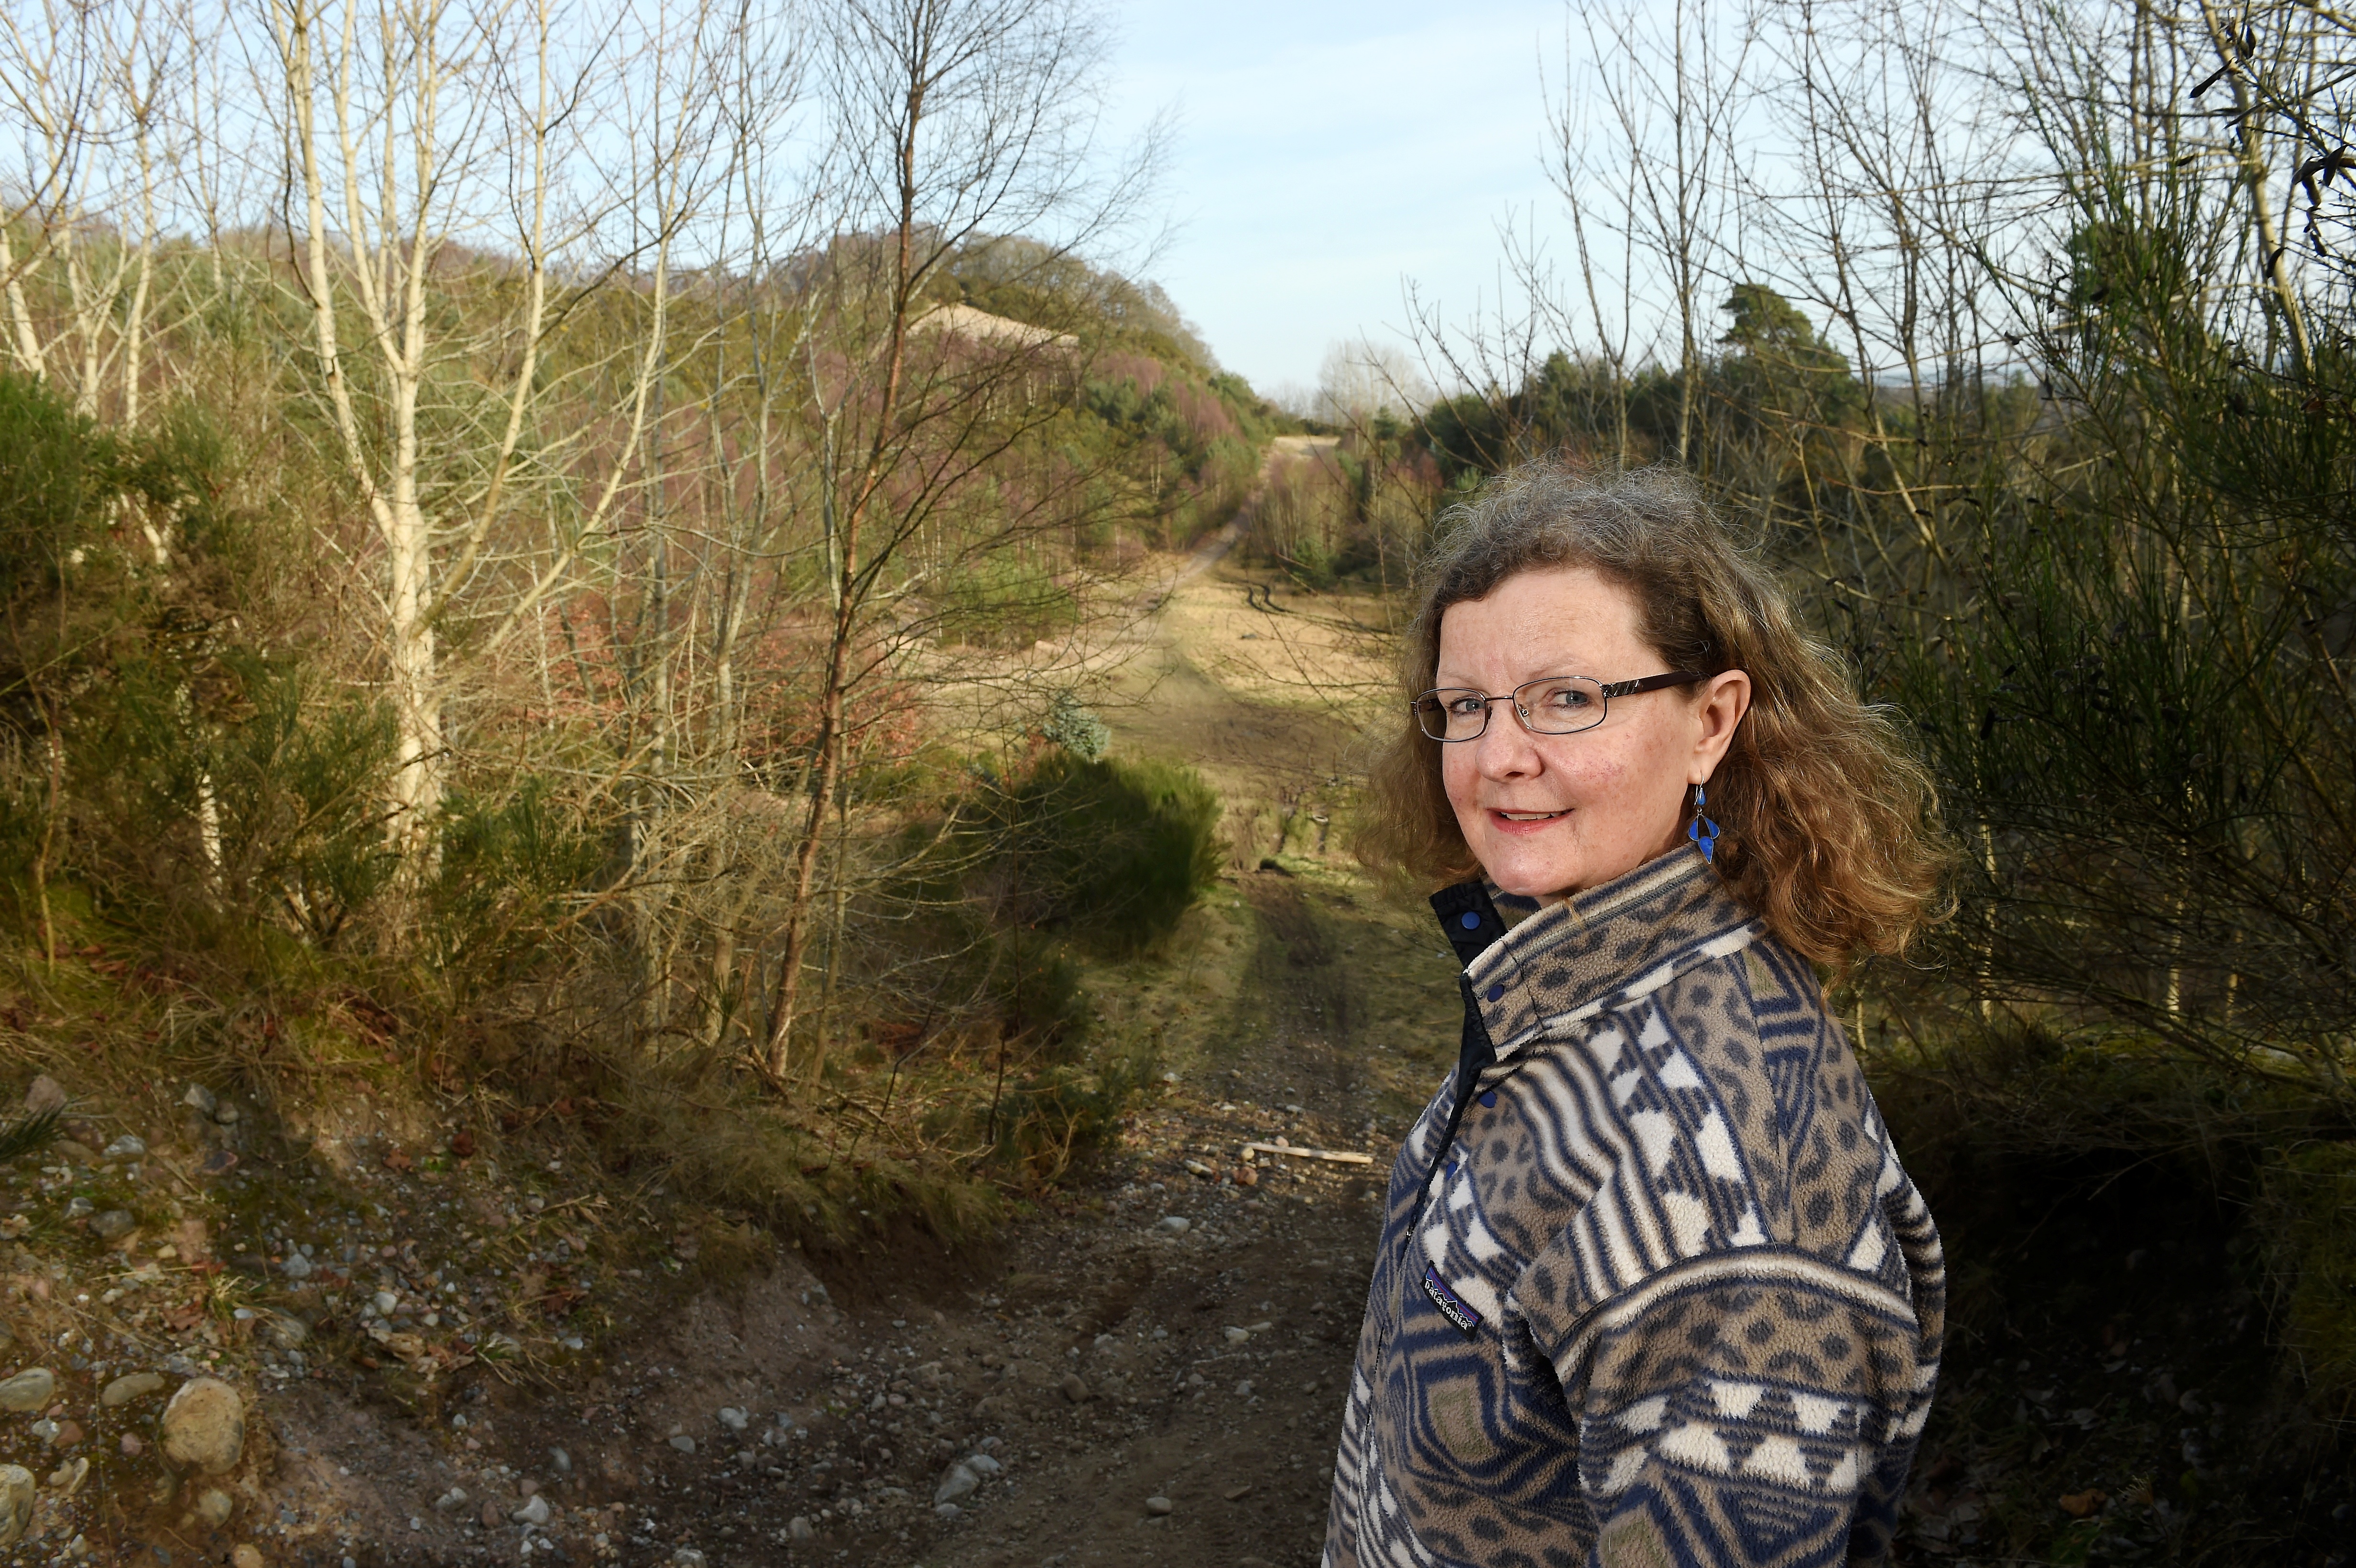 Helen Morgan, Project Manager of the Inverness Adventure Centre Association photographed in the former Torvean Quarry which the group hope to convert to a ski area.